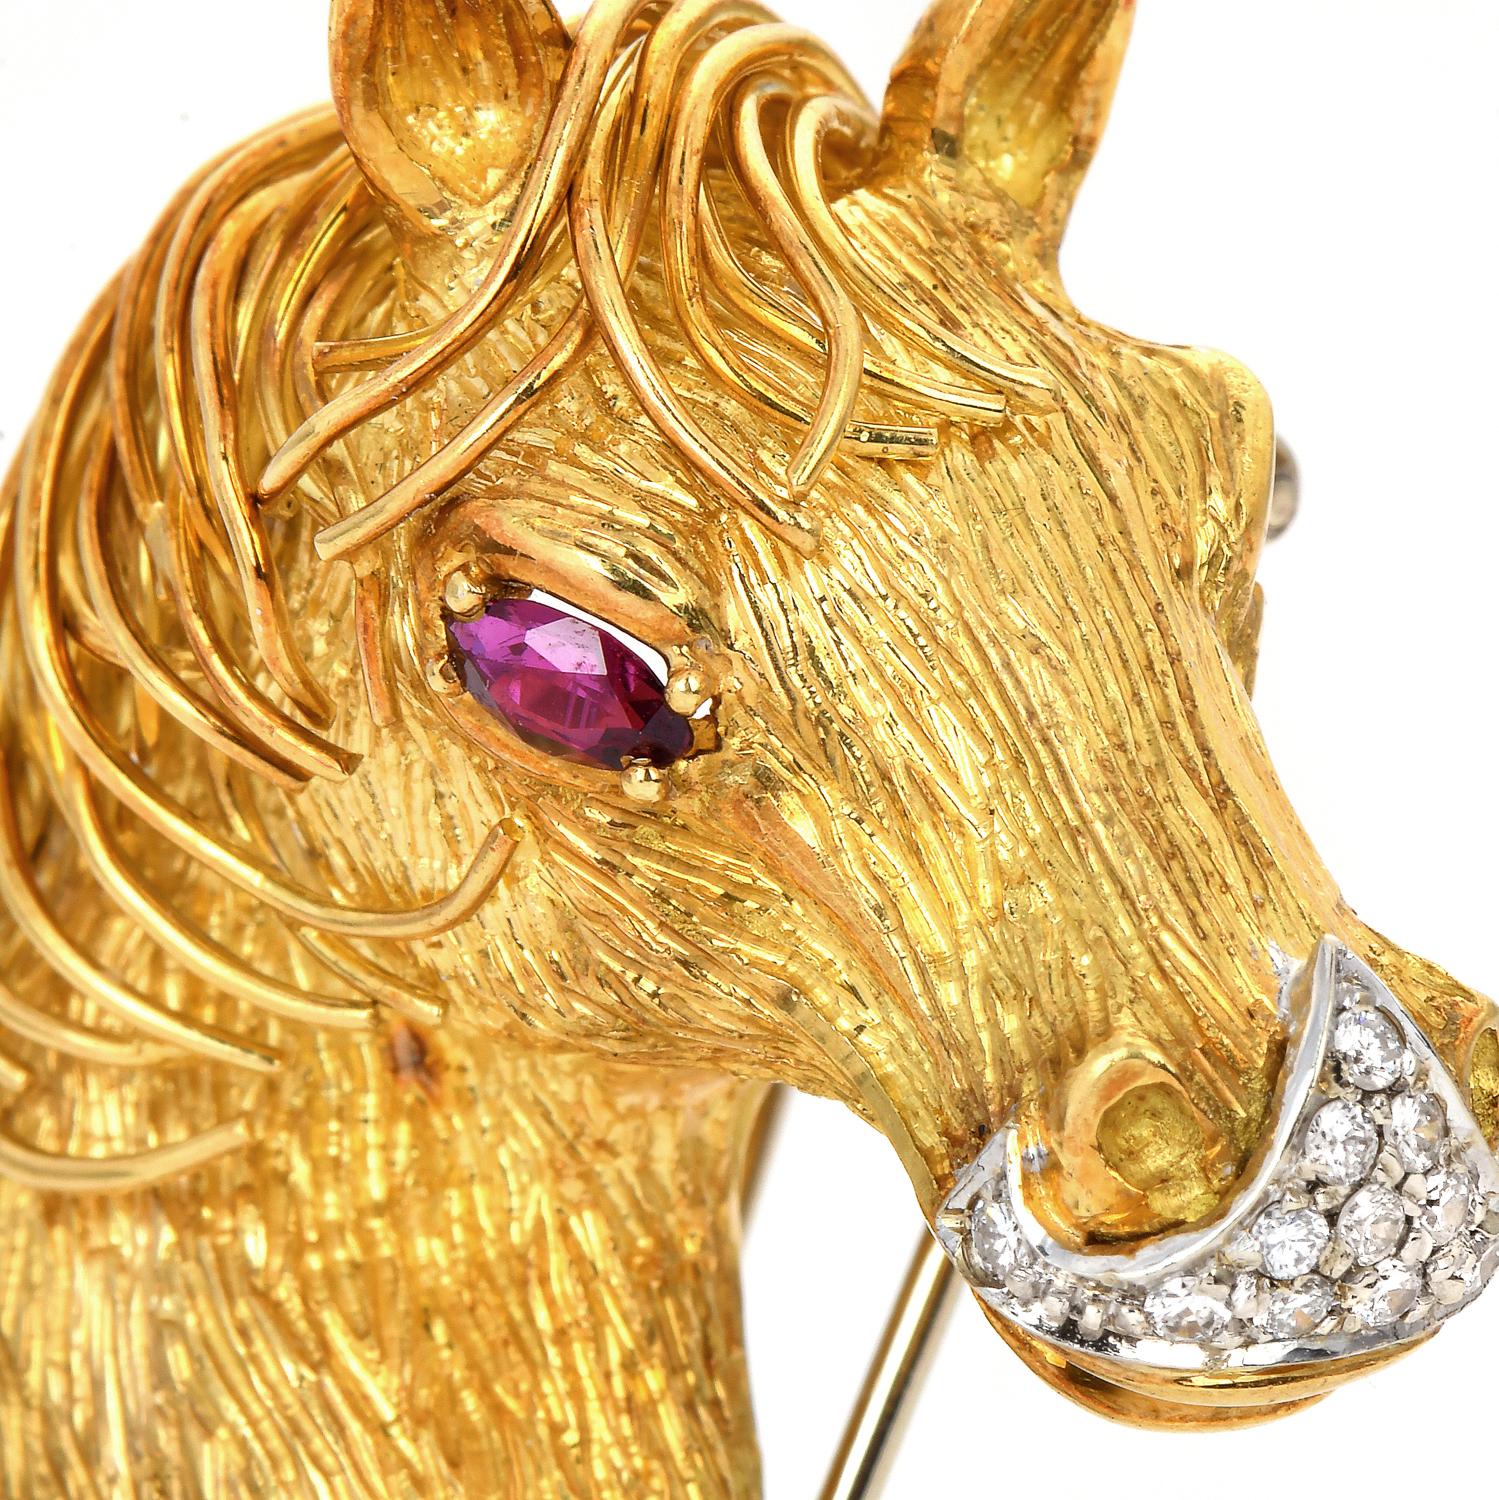 A magnificent Italian made highly detailed Horsehead Motif Brooch Pin.

Crafted in solid 18K Yellow Gold & White Gold Accents

With a textured finish, and highly polished mane.

Adorned in the neck and mouth with 11 round cut, prong set Genuine